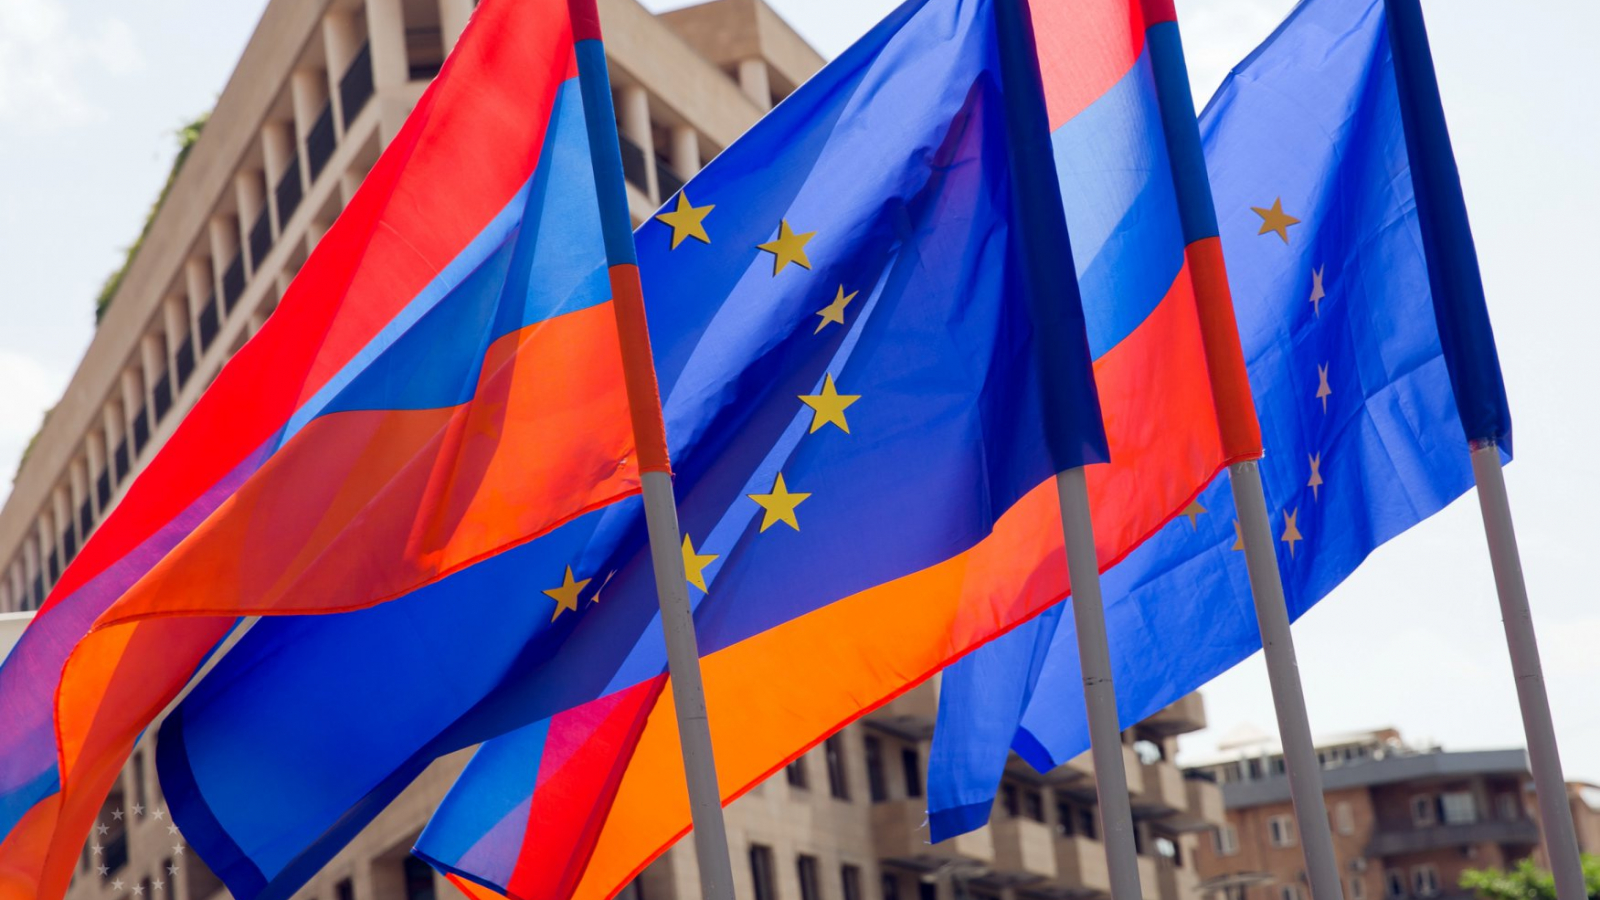 In coming years Armenia approximates with large part of EU acquis